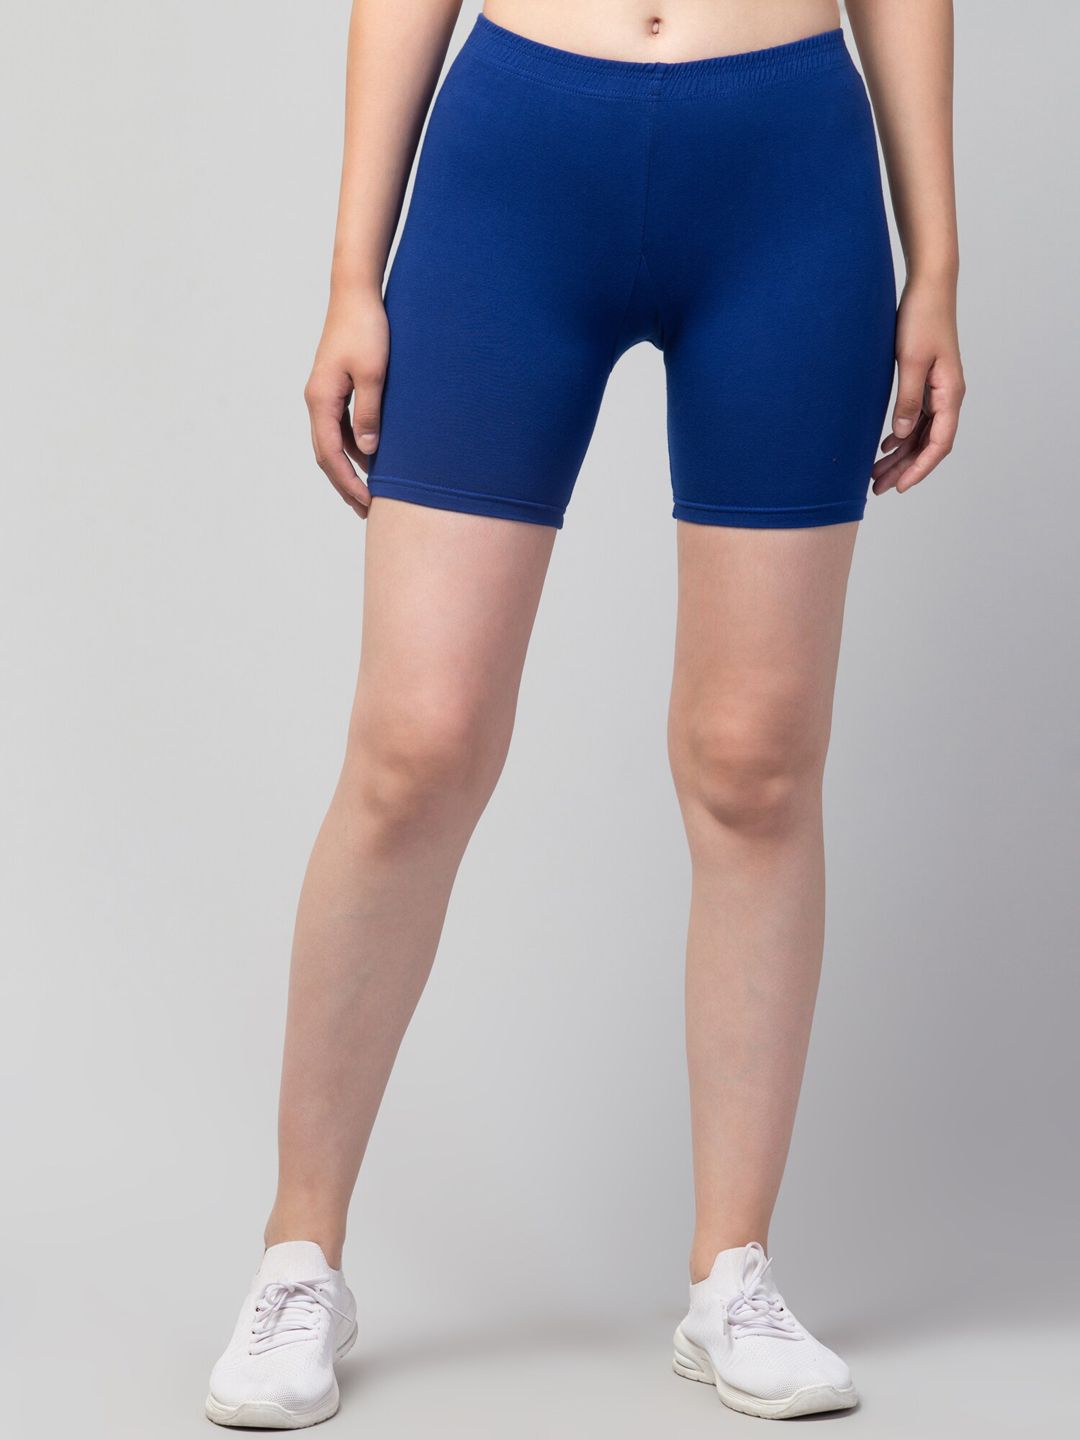 Apraa & Parma Women Slim Fit Sports Shorts Price in India